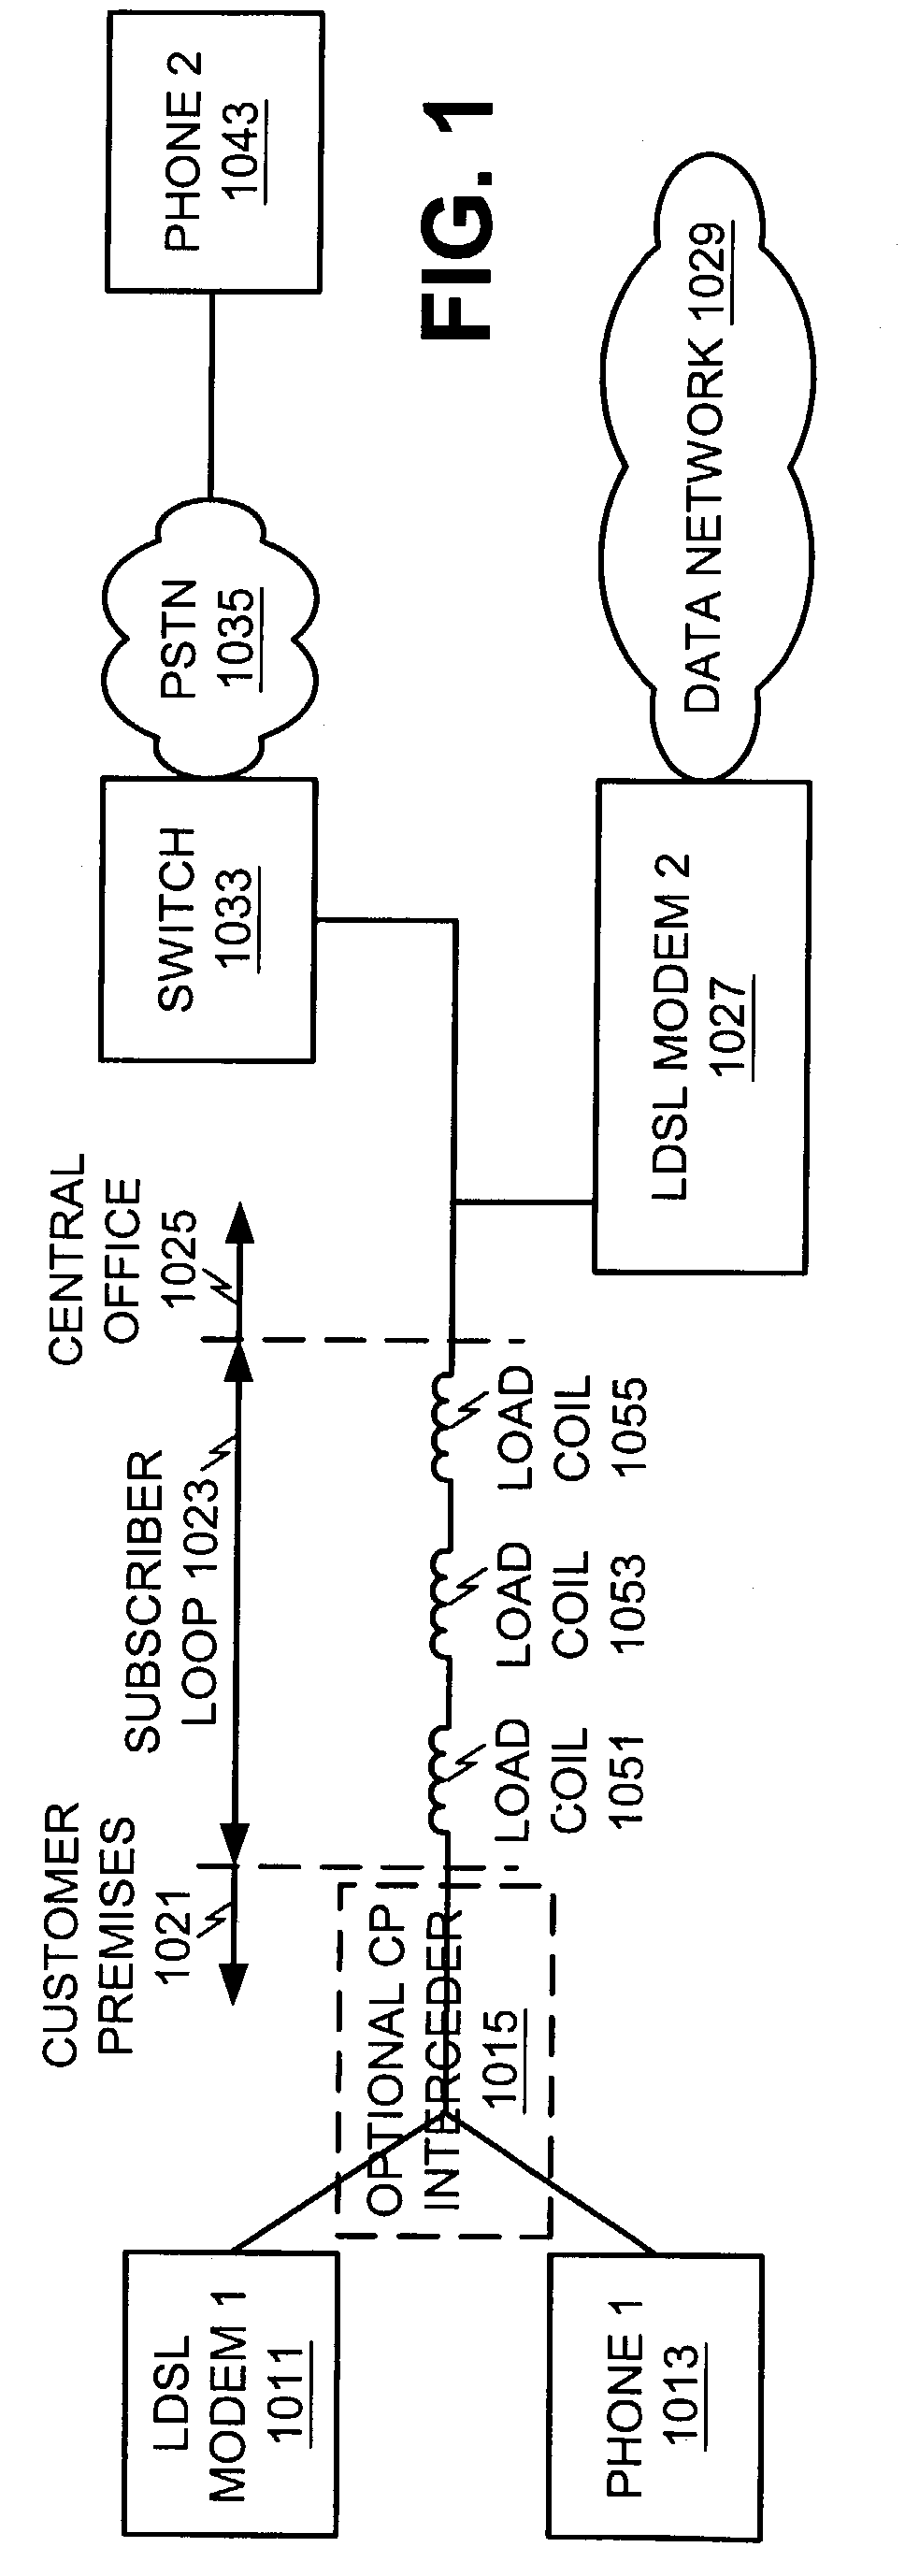 Automatic rapid switching between DSL service and POTS over loaded loops